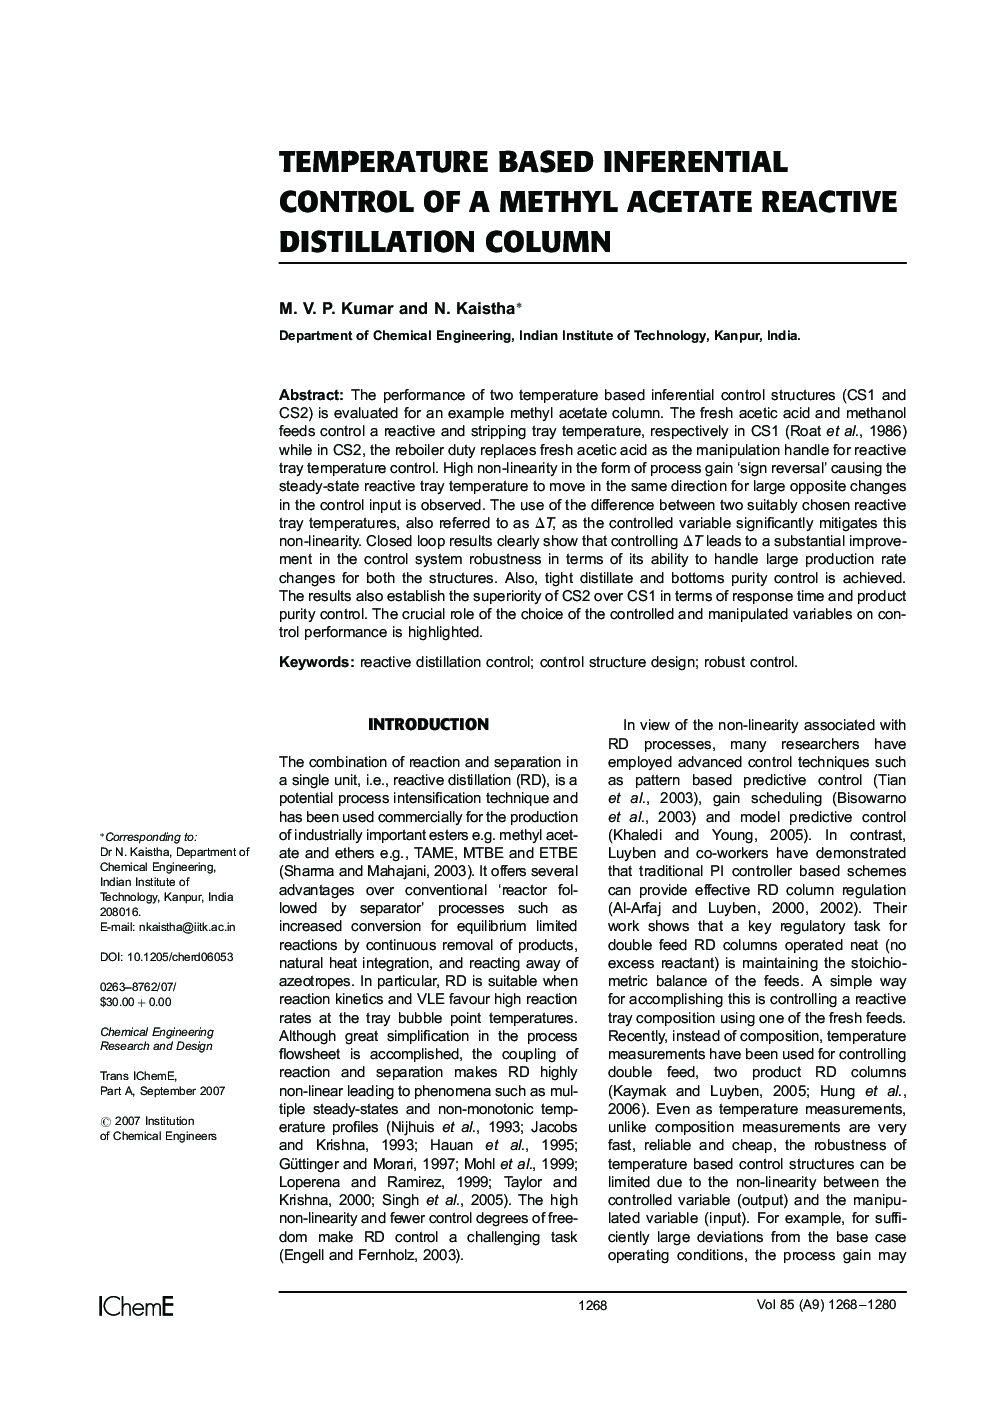 Temperature Based Inferential Control of a Methyl Acetate Reactive Distillation Column